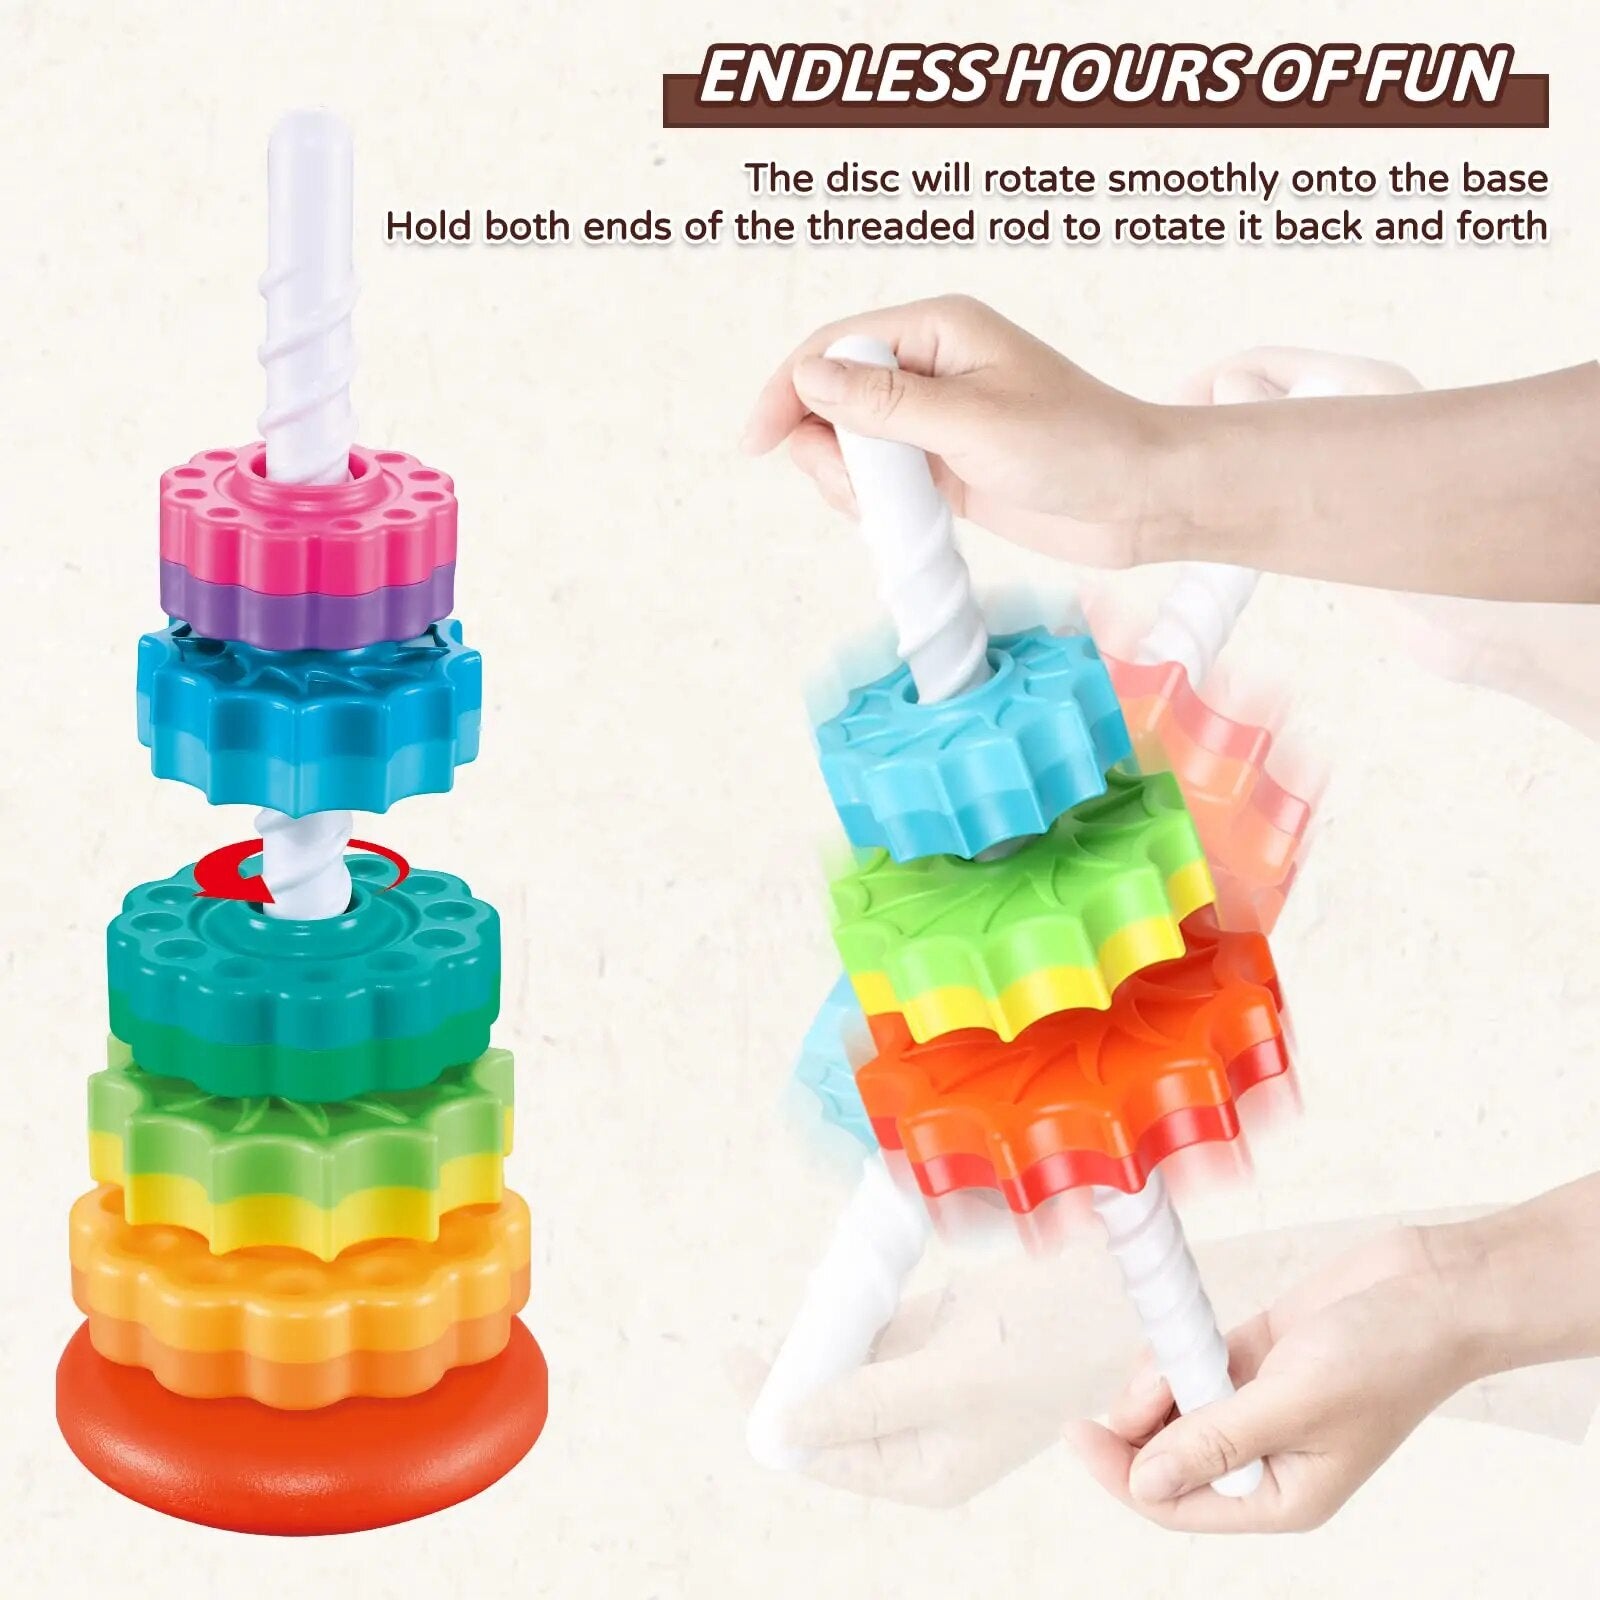 New Rotating Rainbow Tower Baby Stacking Puzzle Toys Safety and Environmental Protection Colored Children'S Toys